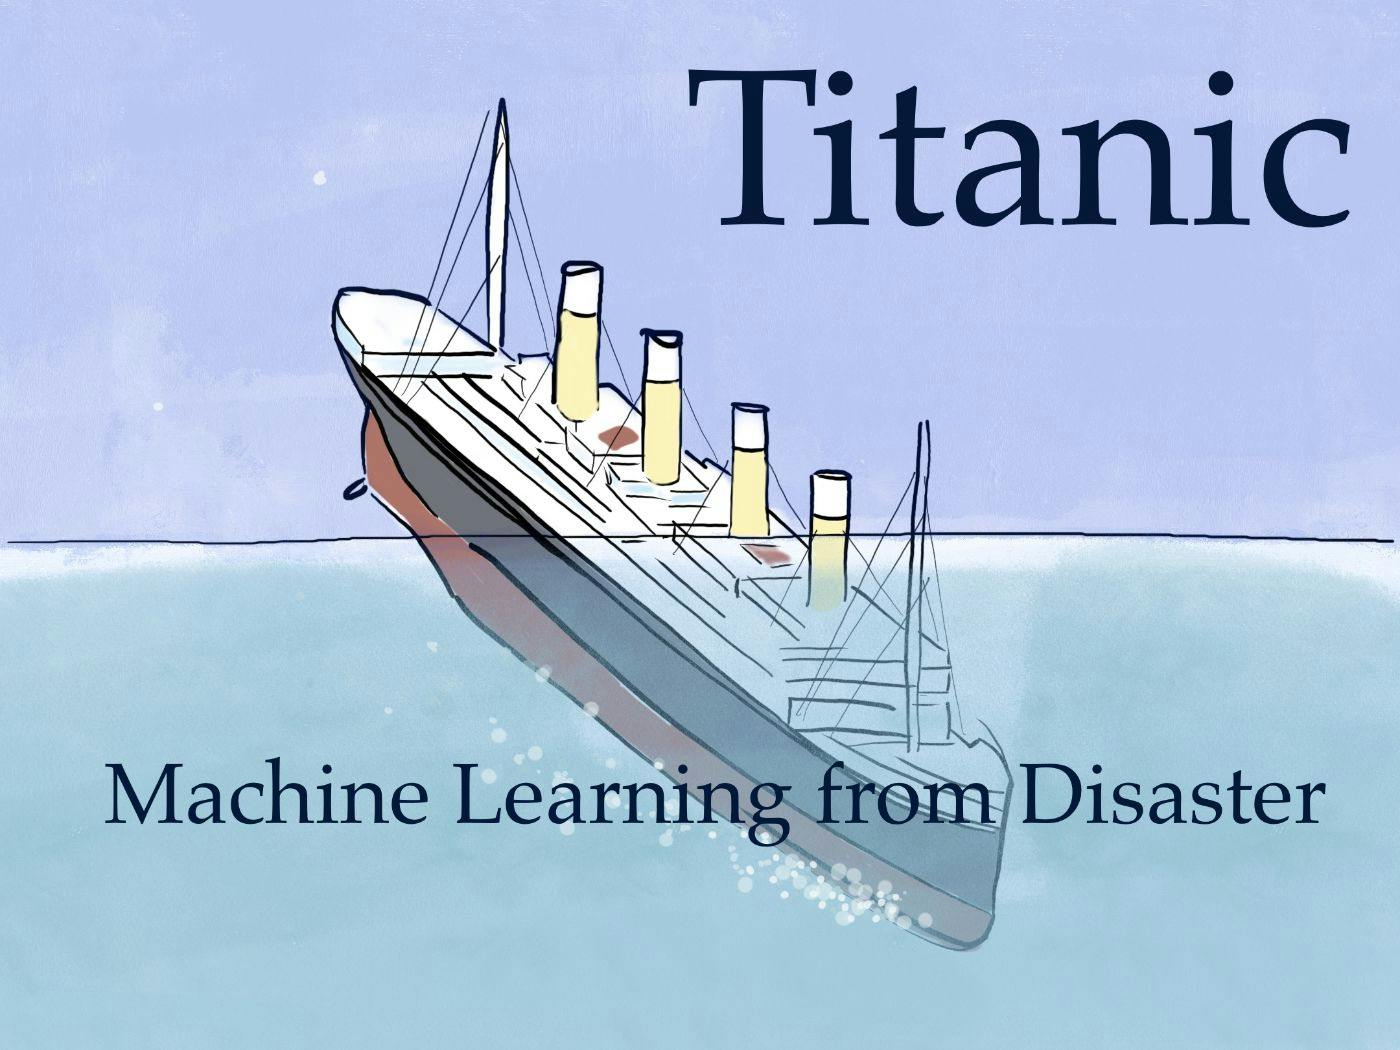 /exploratory-data-analysis-using-data-from-the-titanic feature image